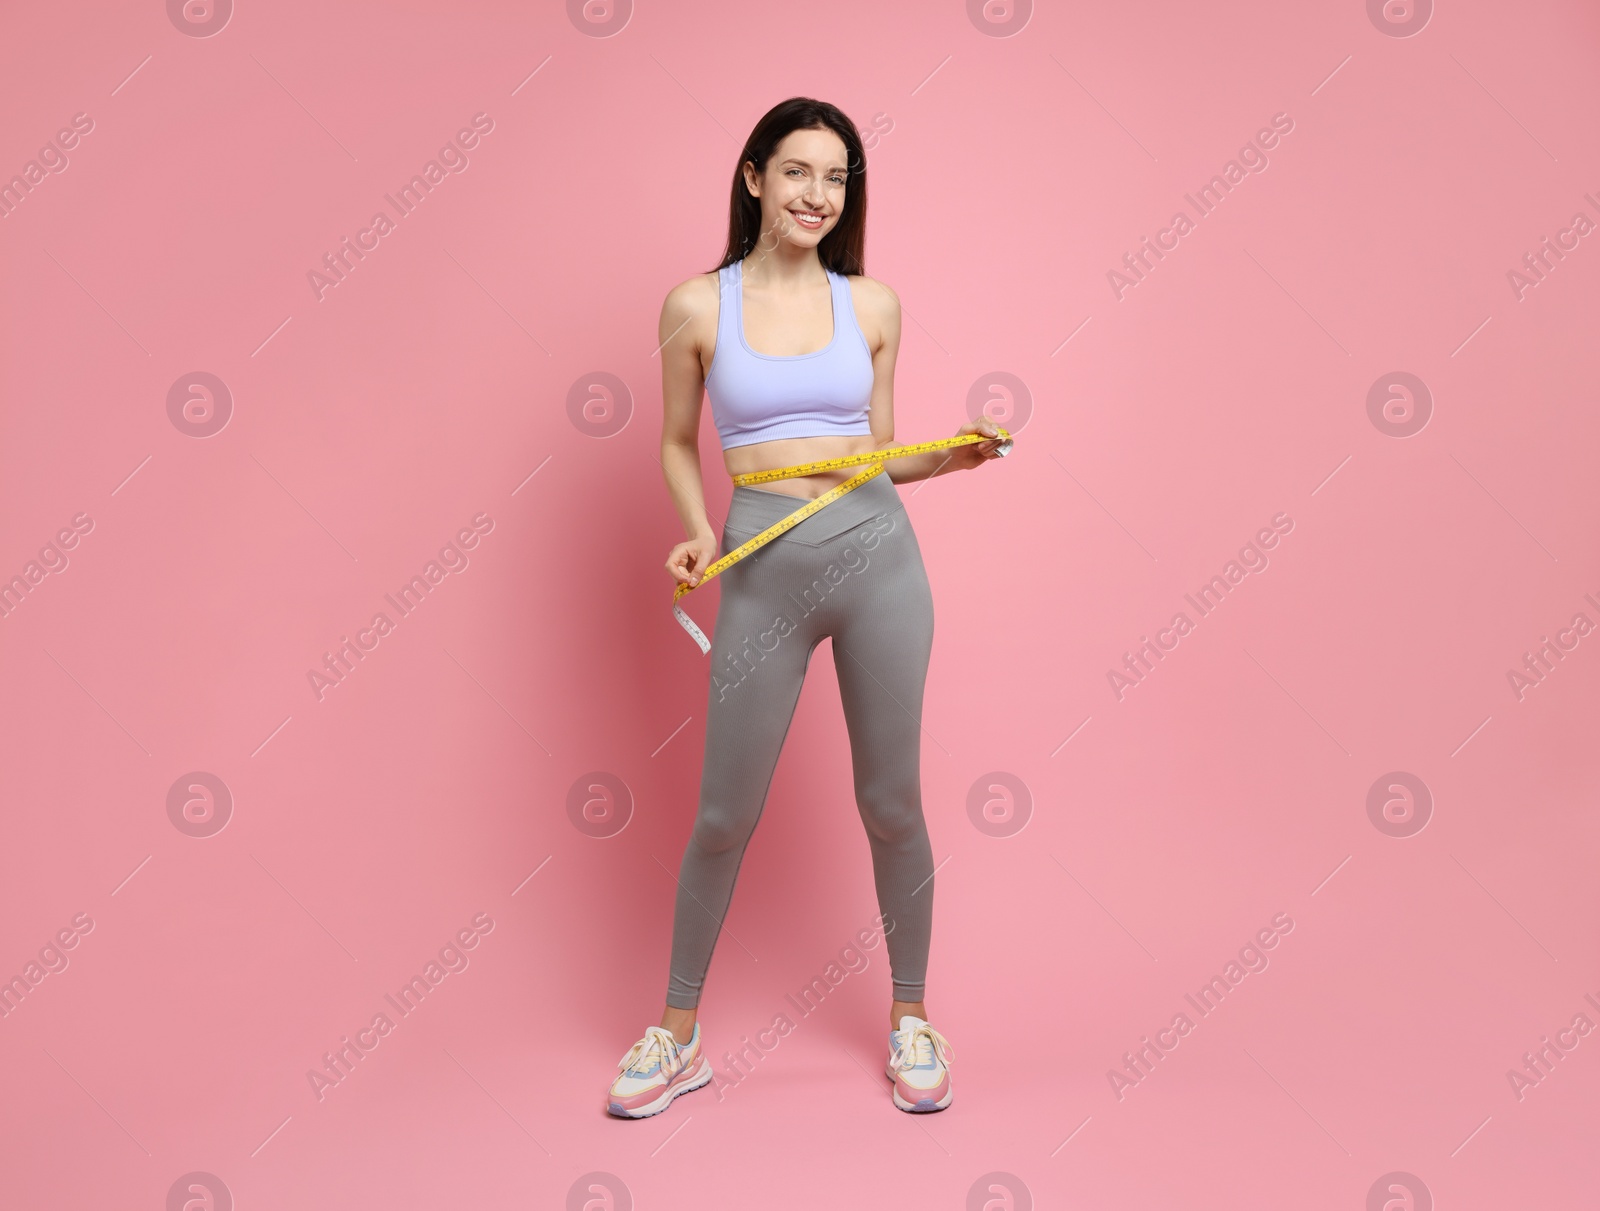 Photo of Happy young woman with measuring tape showing her slim body on pink background